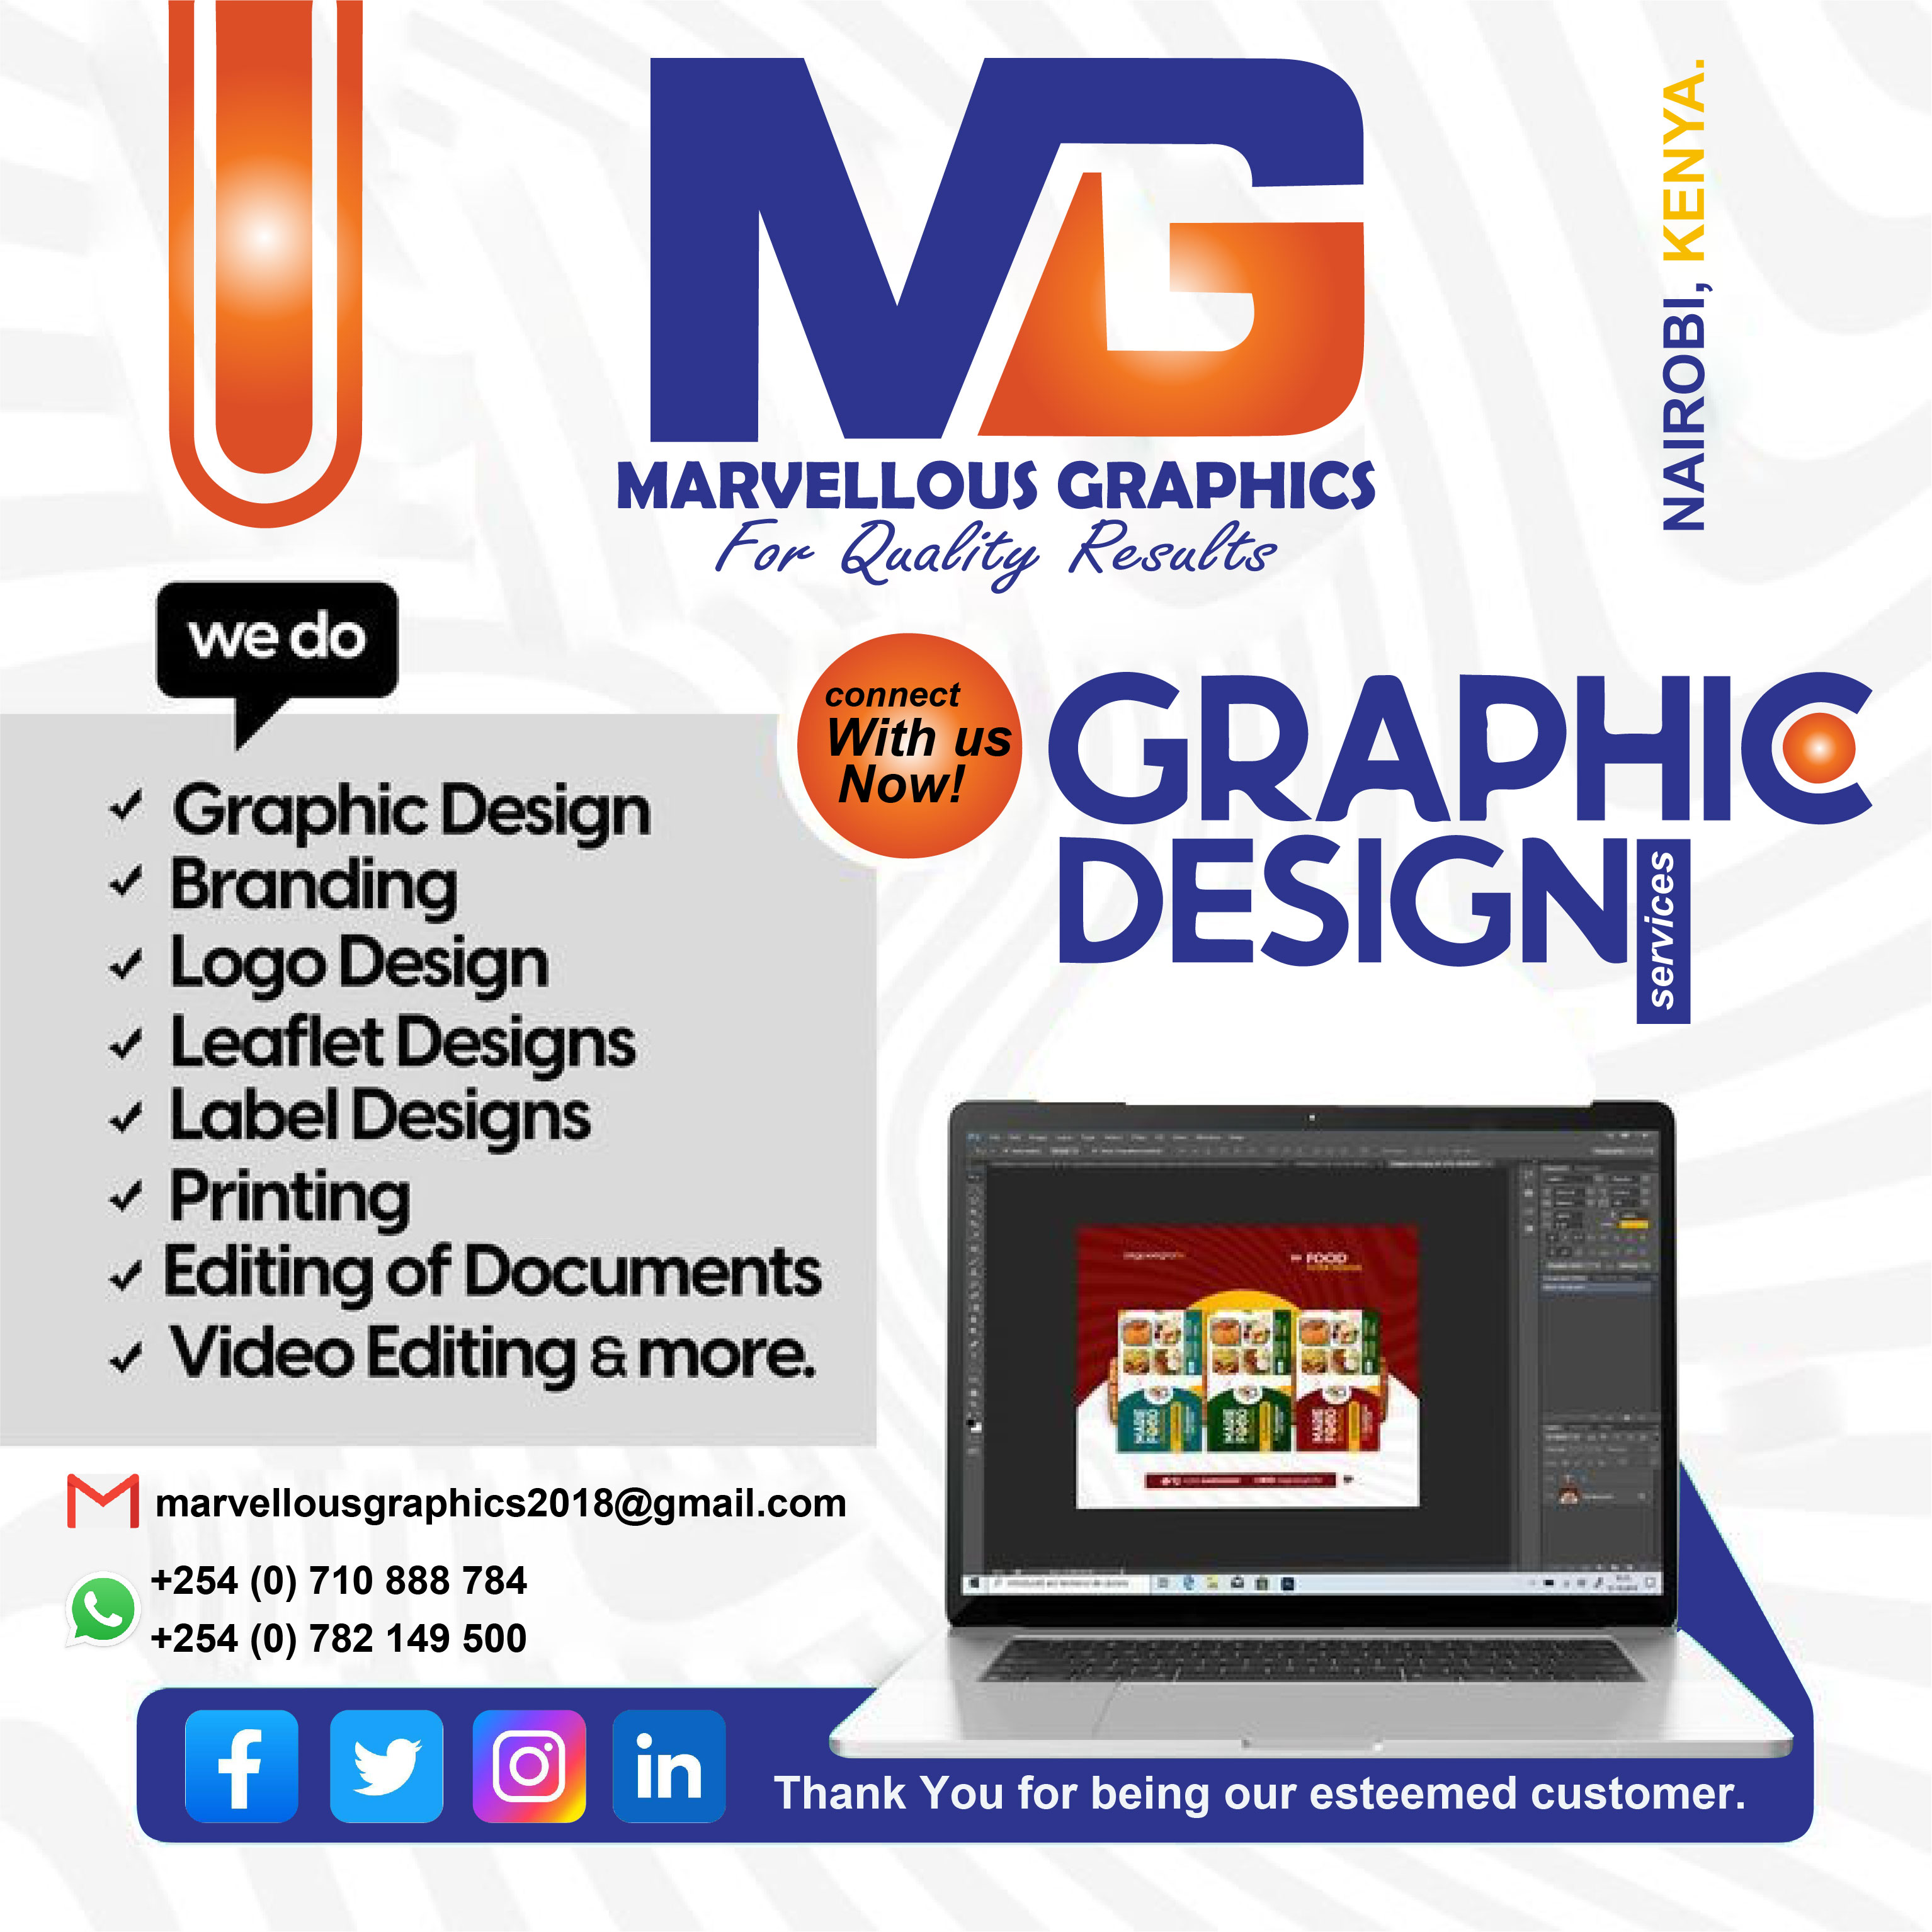 y MARVELLOUS GRAPHICS
for &luat: ty Kesulls

= & GRAPHIC
© Branding DESIGN]

+ Logo Design

+ Leaflet Designs

+ Label Designs

+ Printing

v Editing of Documents
+ Video Editing a more.

NAIROBI,

 
 
    
 
   

™M marvellousgraphics2018@gmail.com

+254 (0) 710 888 784
+254 (0) 782 149 500

  

f yy IN Thank You for being our esteemed customer.